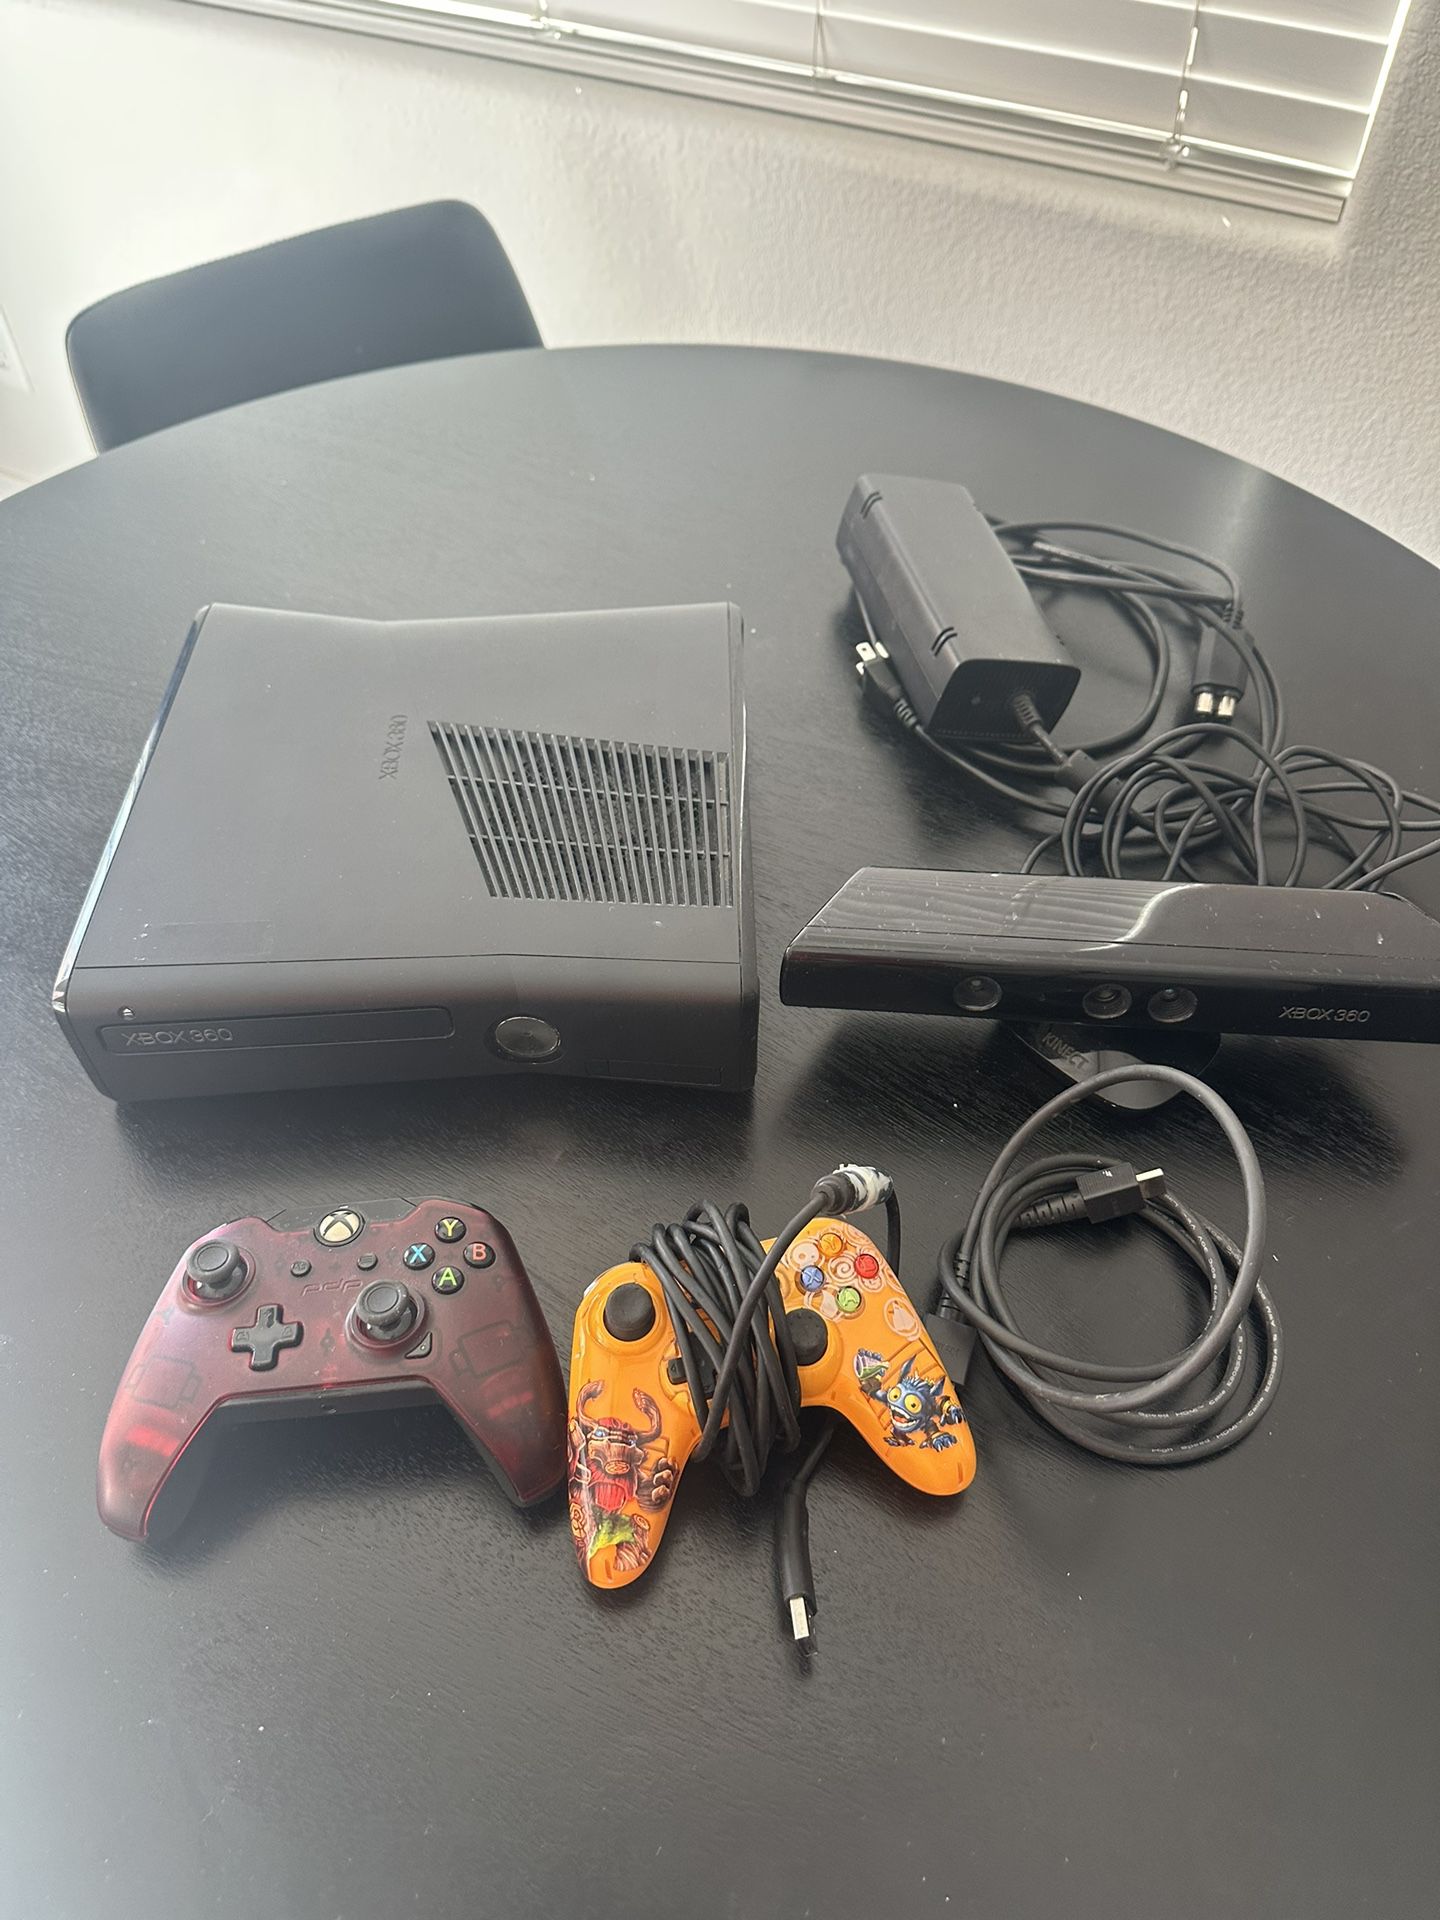 Xbox 360 S 250 GB (Kinect, Controllers & Games Included)